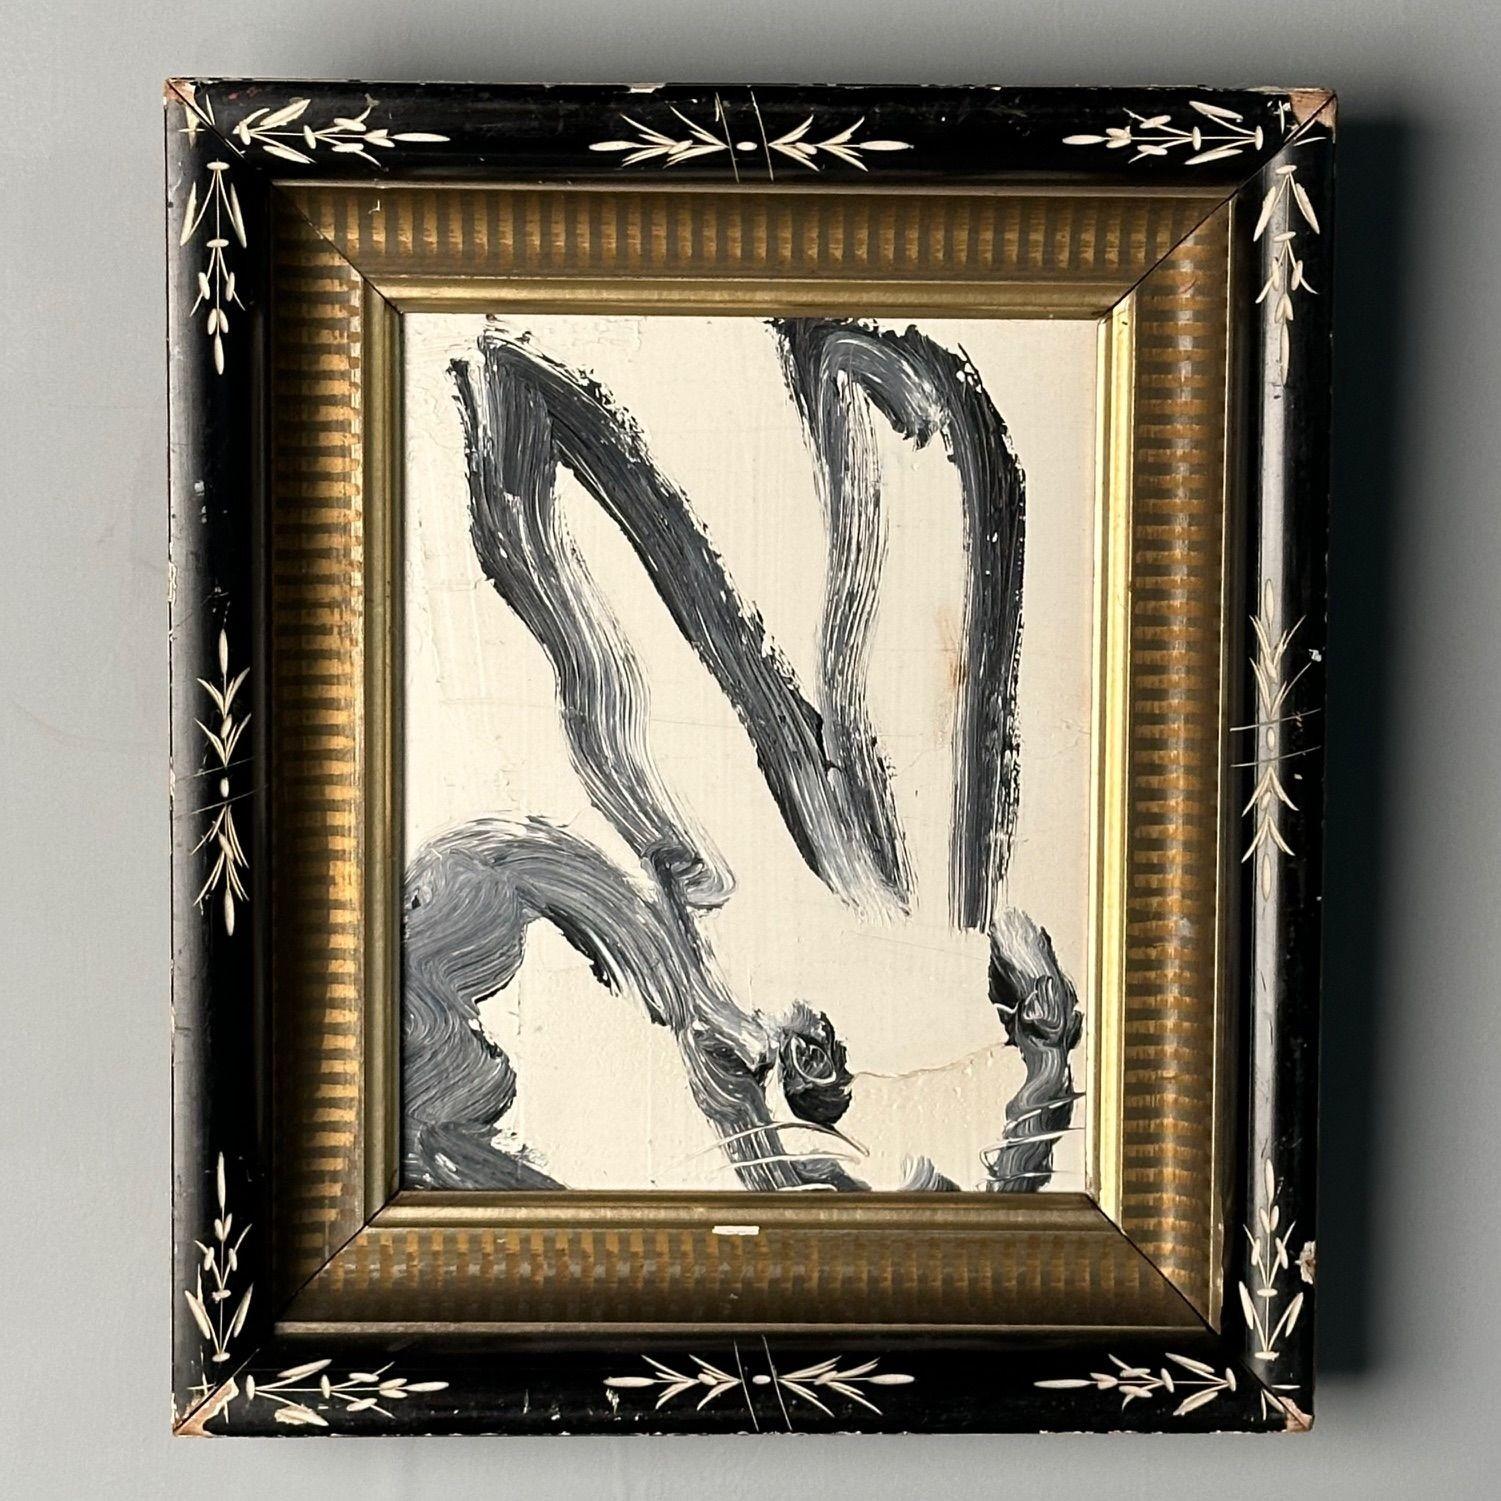 Hunt Slonem, Neo-Expressionist, Black and White Bunny Oil Painting, Framed, 2009

Hunt Slonem bunny oil painting signed and dated on the reverse. Oil on wood, 9.5 x 7.5 in. / Frame: 14.25 x 12 in. This painting features Slonem's signature bunny